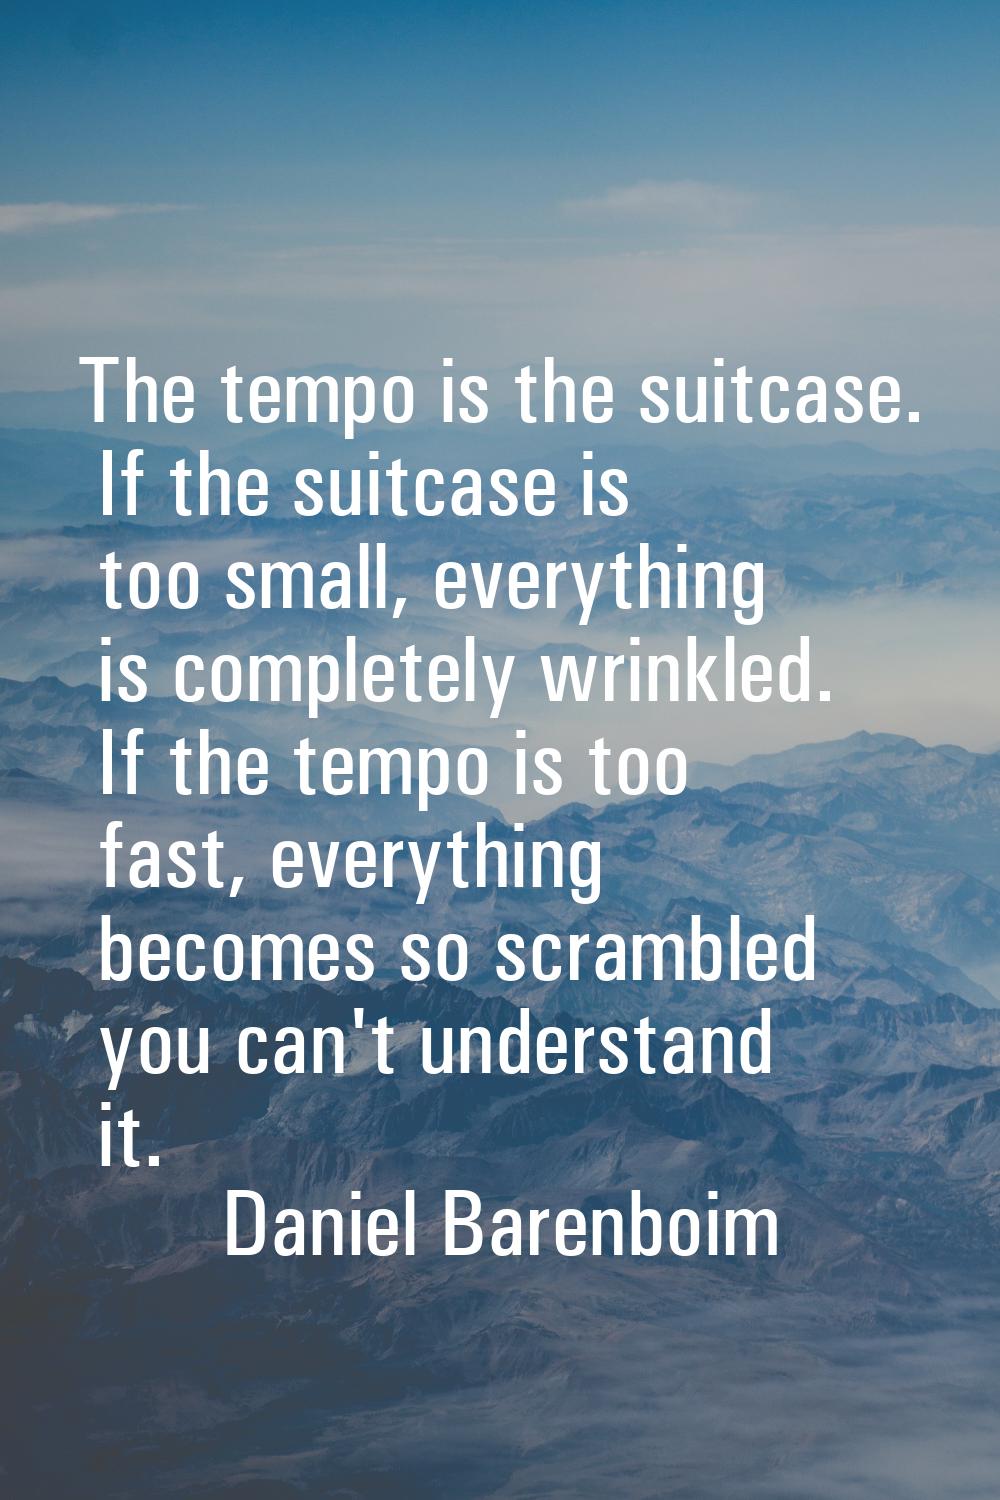 The tempo is the suitcase. If the suitcase is too small, everything is completely wrinkled. If the 